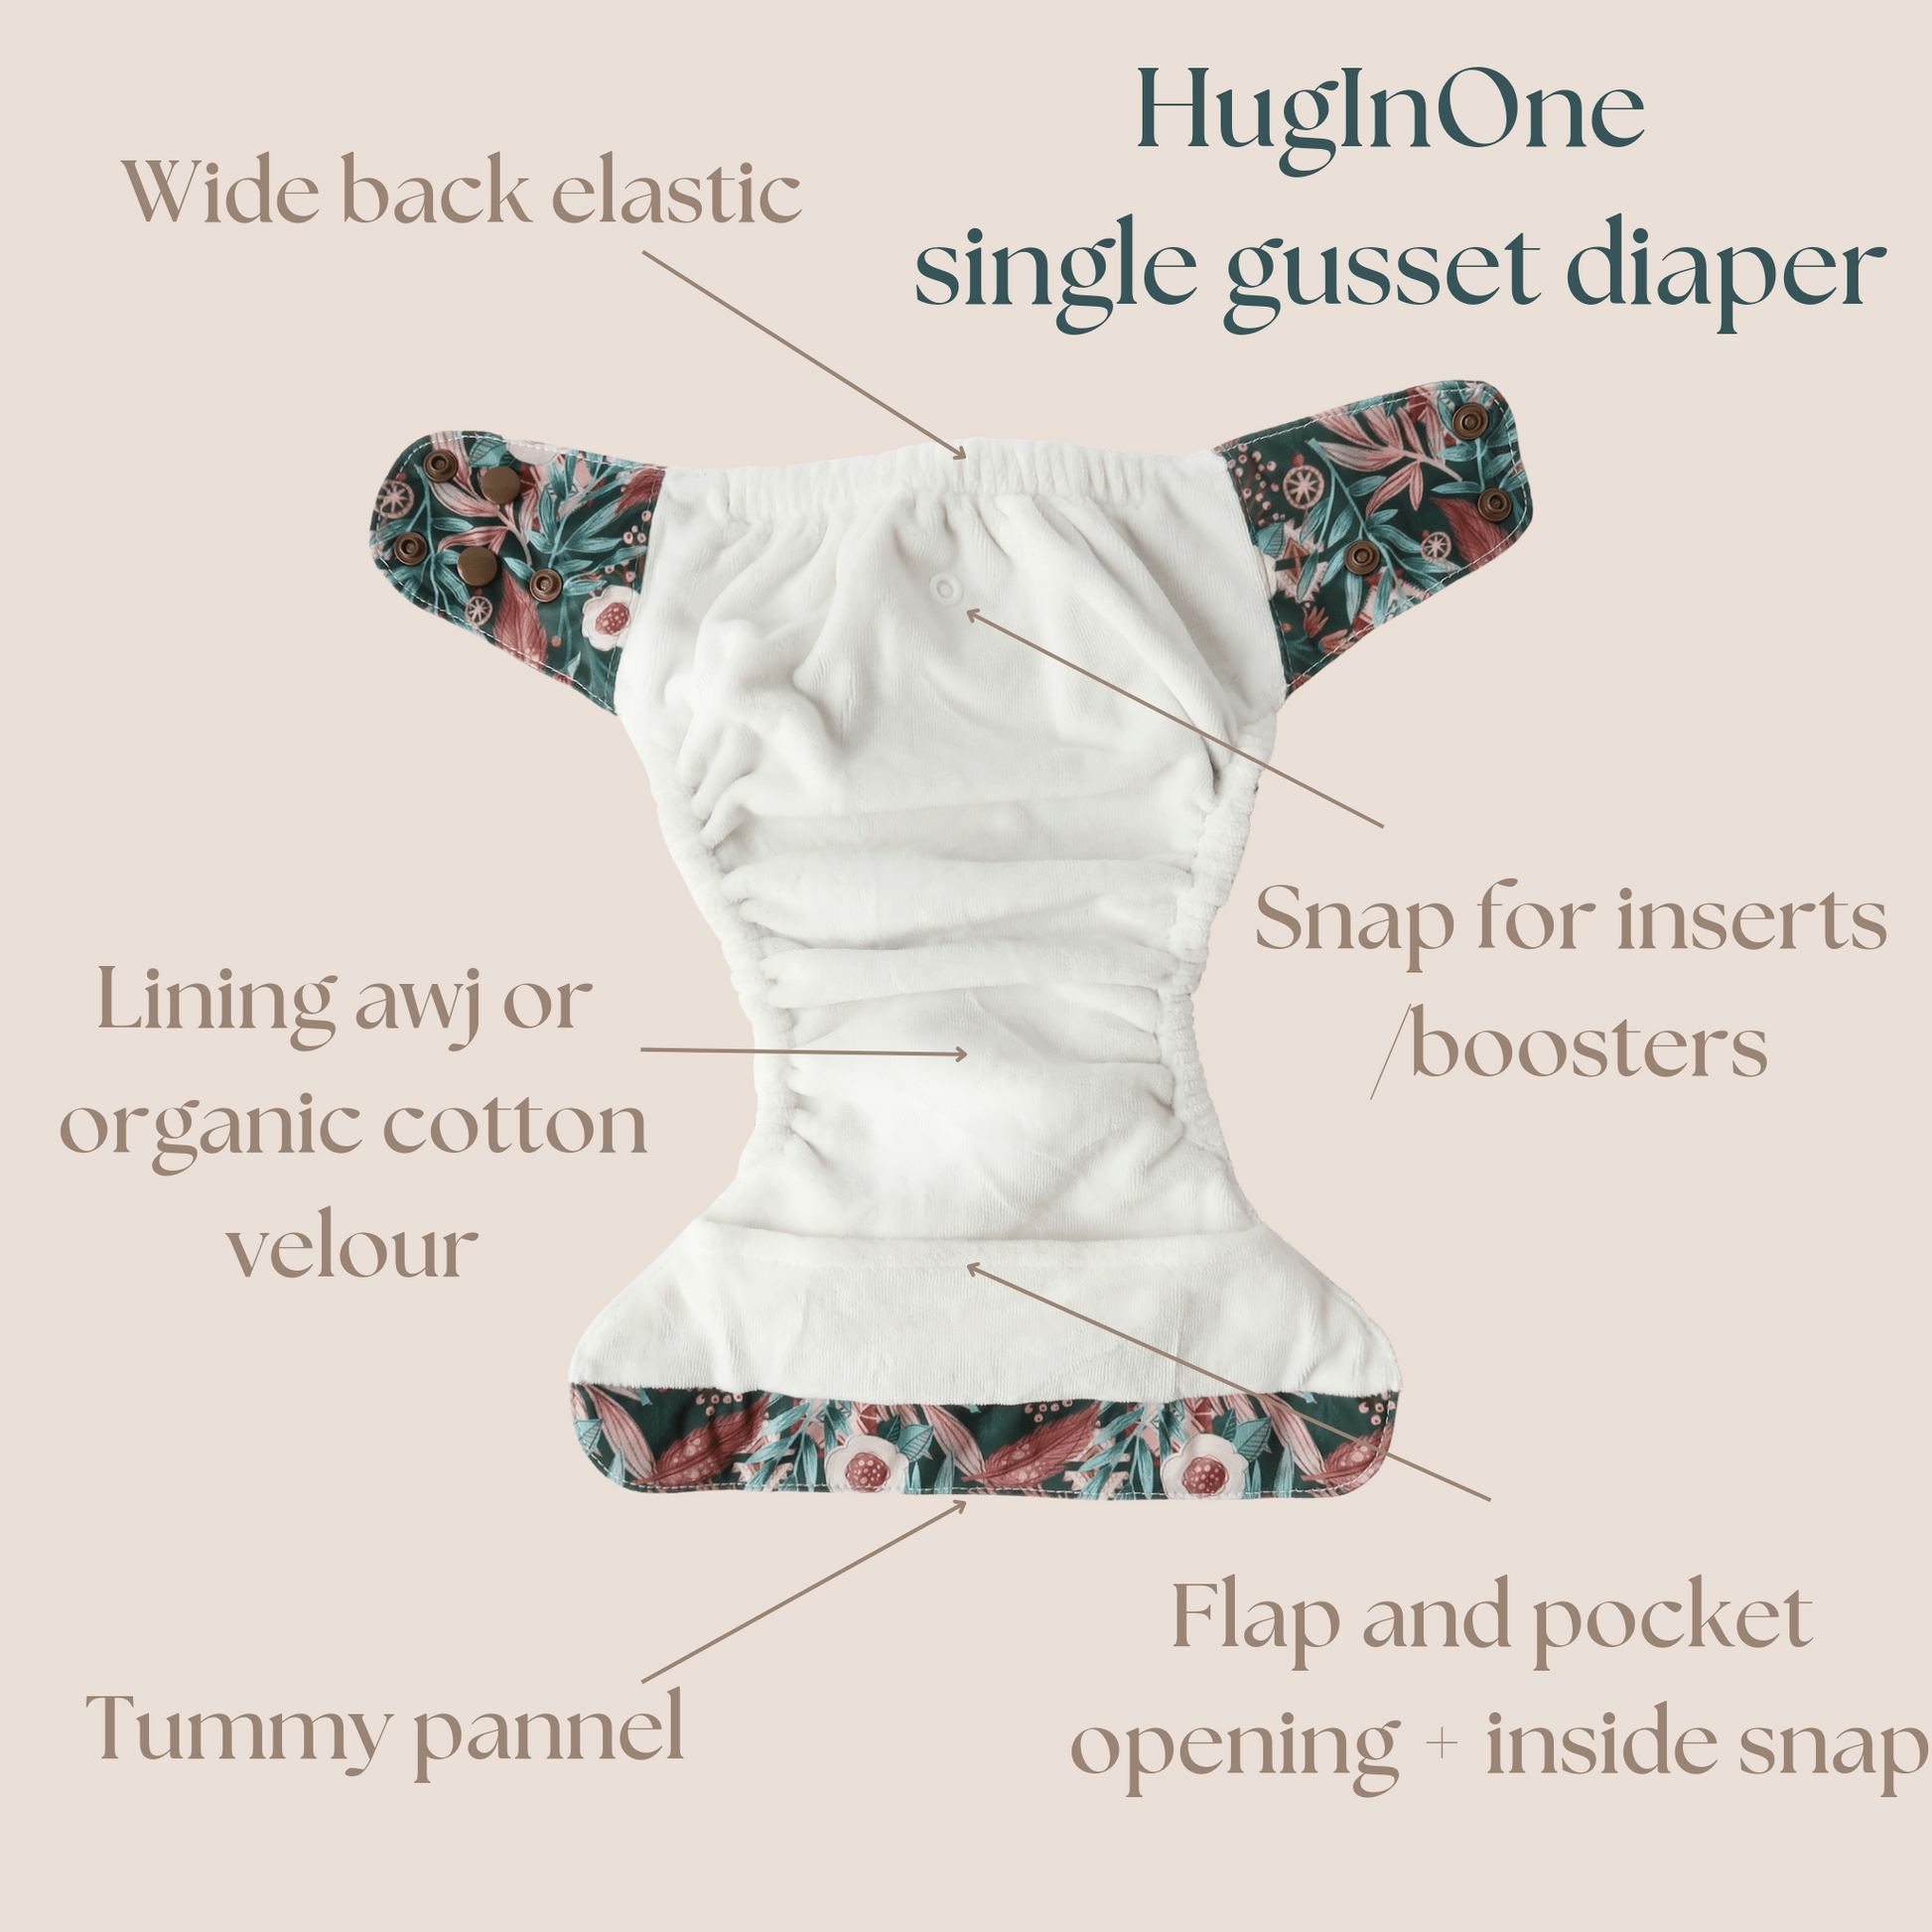 Diaper Fabrics: What are PUL and TPU?